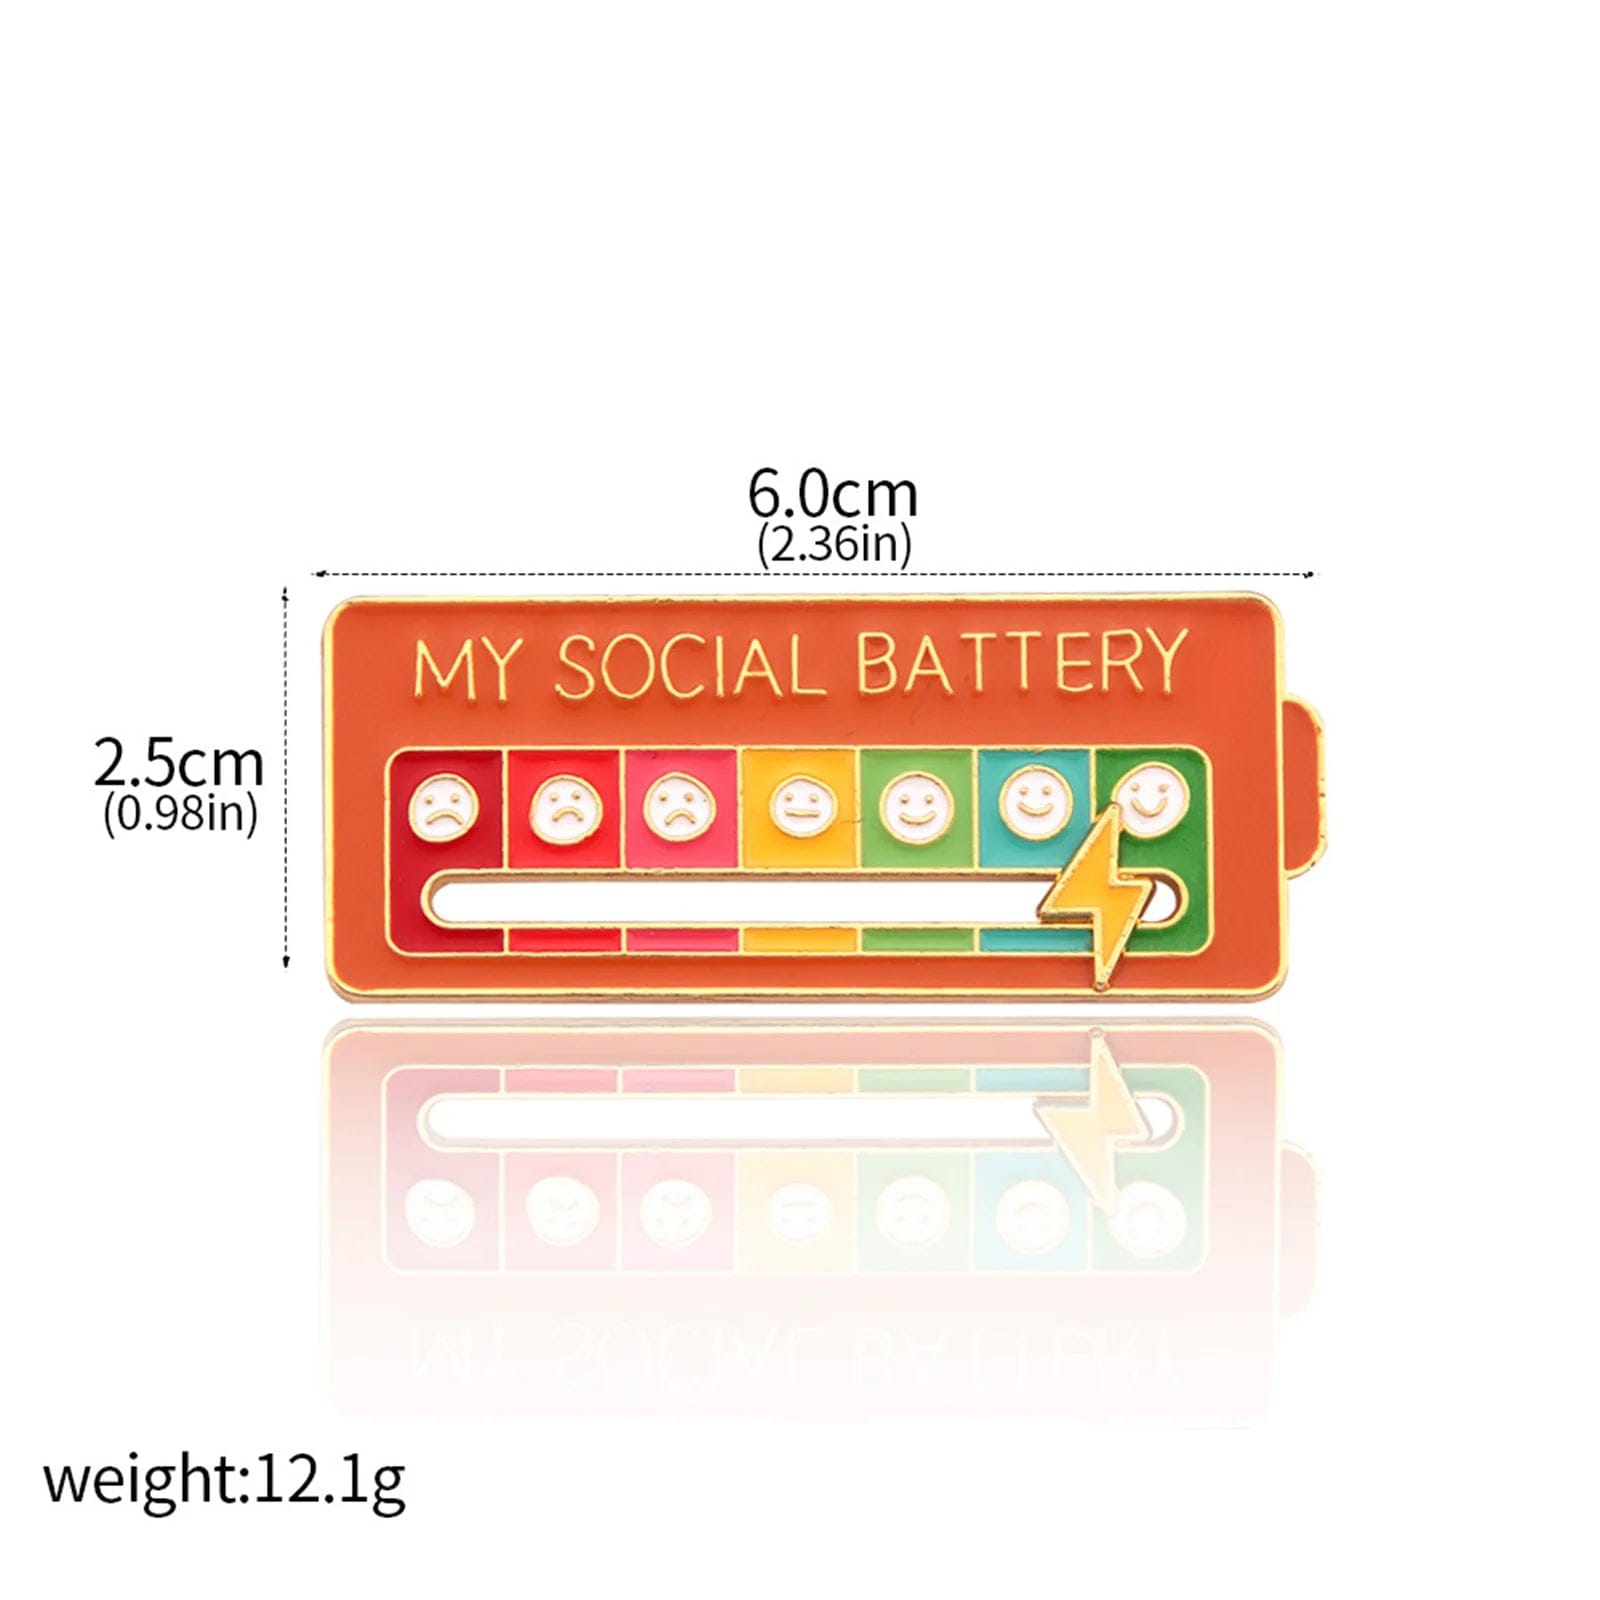 HomeBound Essentials 1pc Orange / CHINA EmotionTrend Pins: Social Battery Mood Tracker Enamel Metal Brooch Badges, Fashion Jewelry Accessory Gift